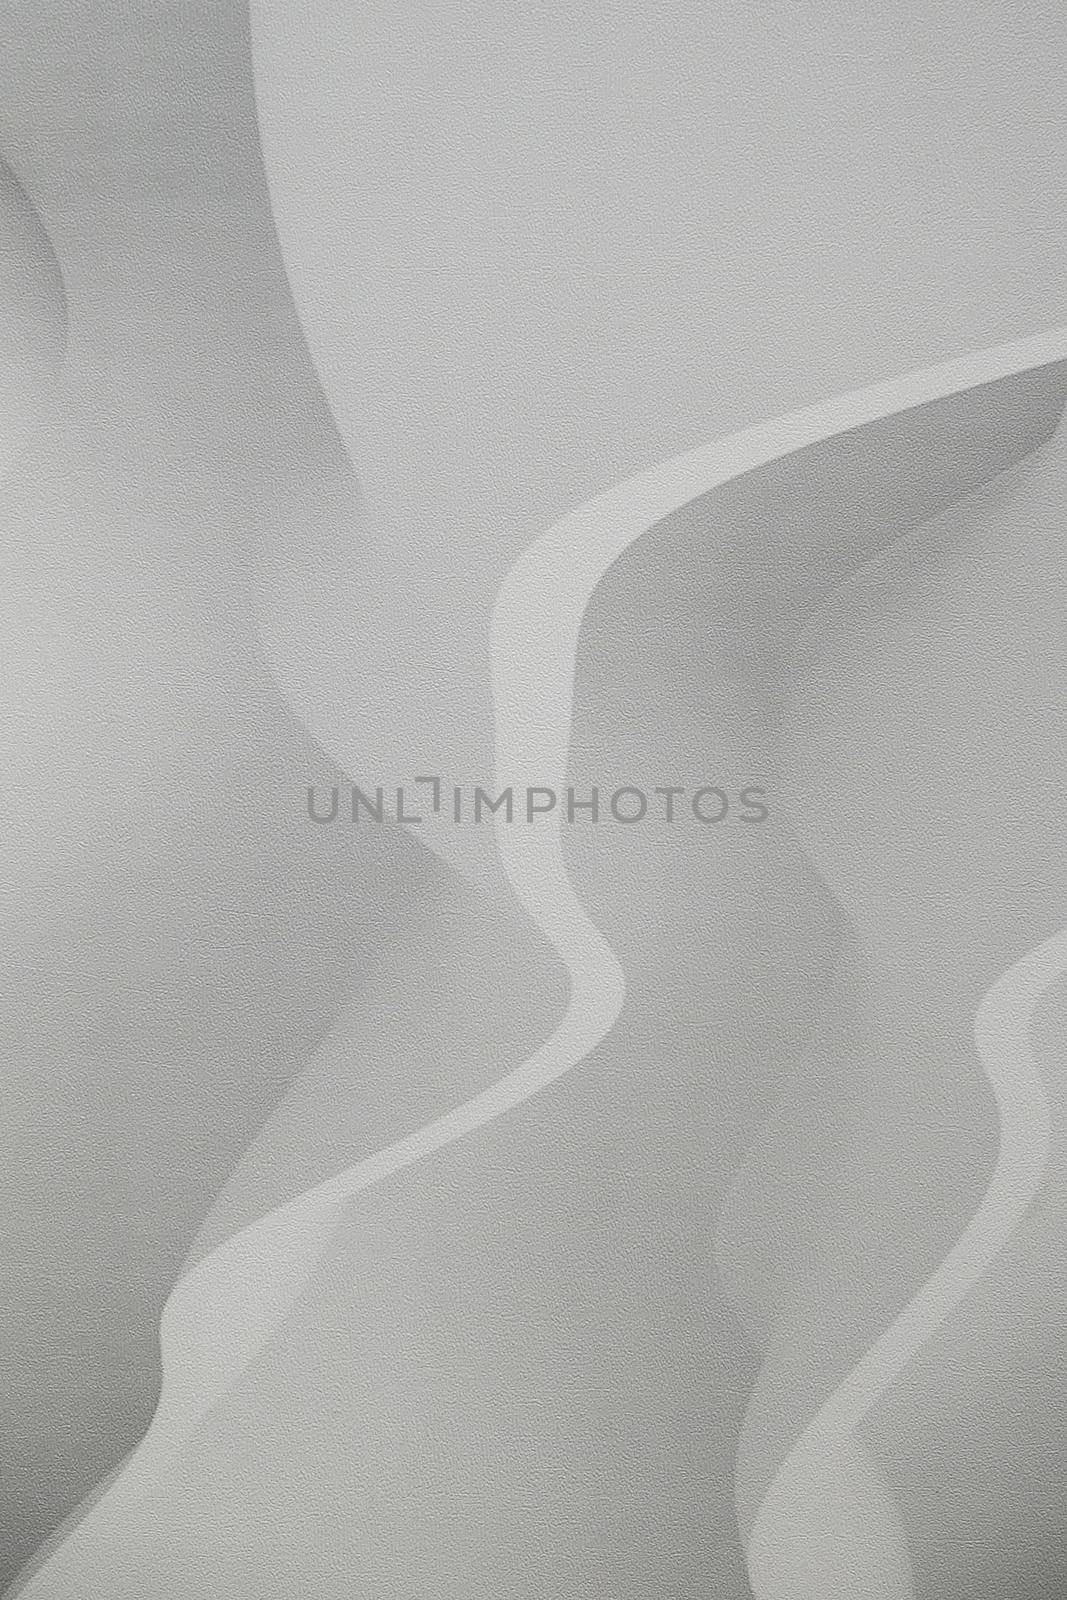 Modern wall wallpaper texture for background. Home decoration, abstraction, structure of waves or hills, gray and white.